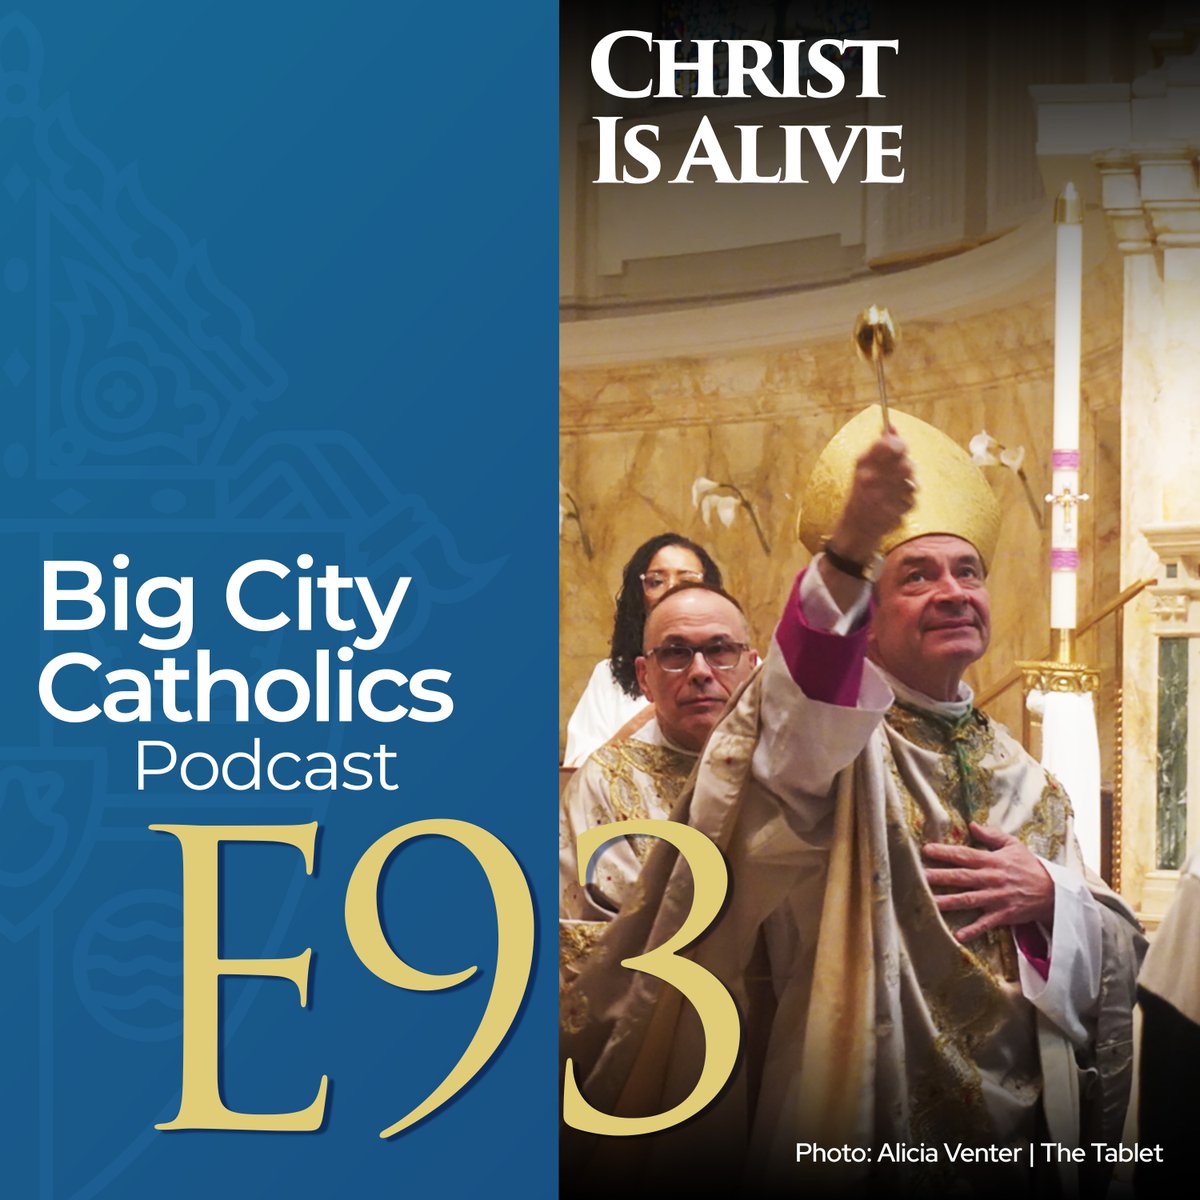 If you haven't already caught up on #BigCityCatholics, catch this special episode featuring @bishopofbklyn's Easter Sunday Homily. Listen to the full episode with the link: bit.ly/49Bd9WW #dioceseofbrooklyn #christinnyc #catholicpodcast #commutepodcast #christisrisen